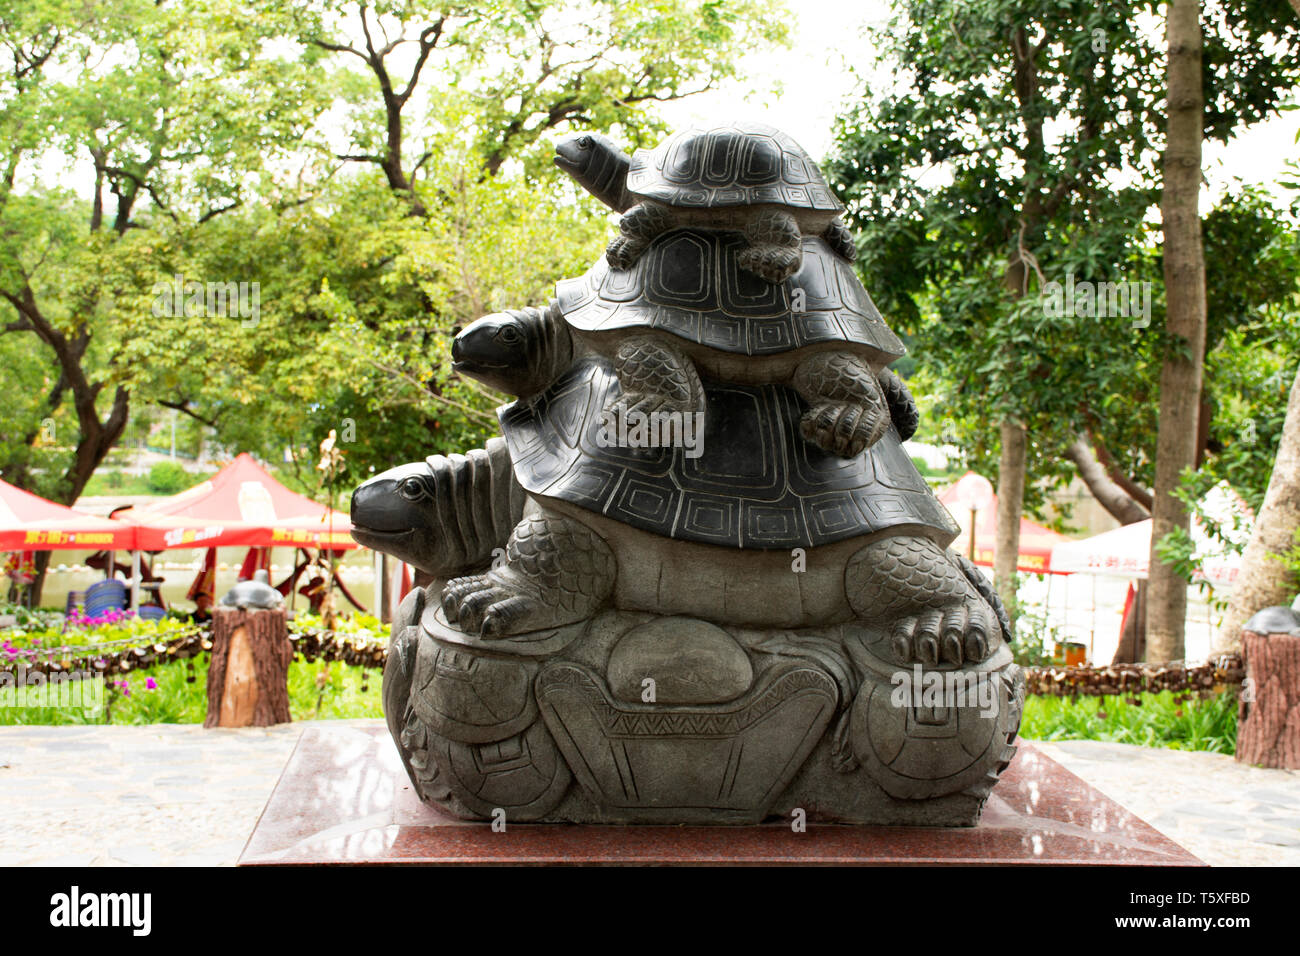 Tortoise Or Turtle Statue For Chinese People And Foreigner